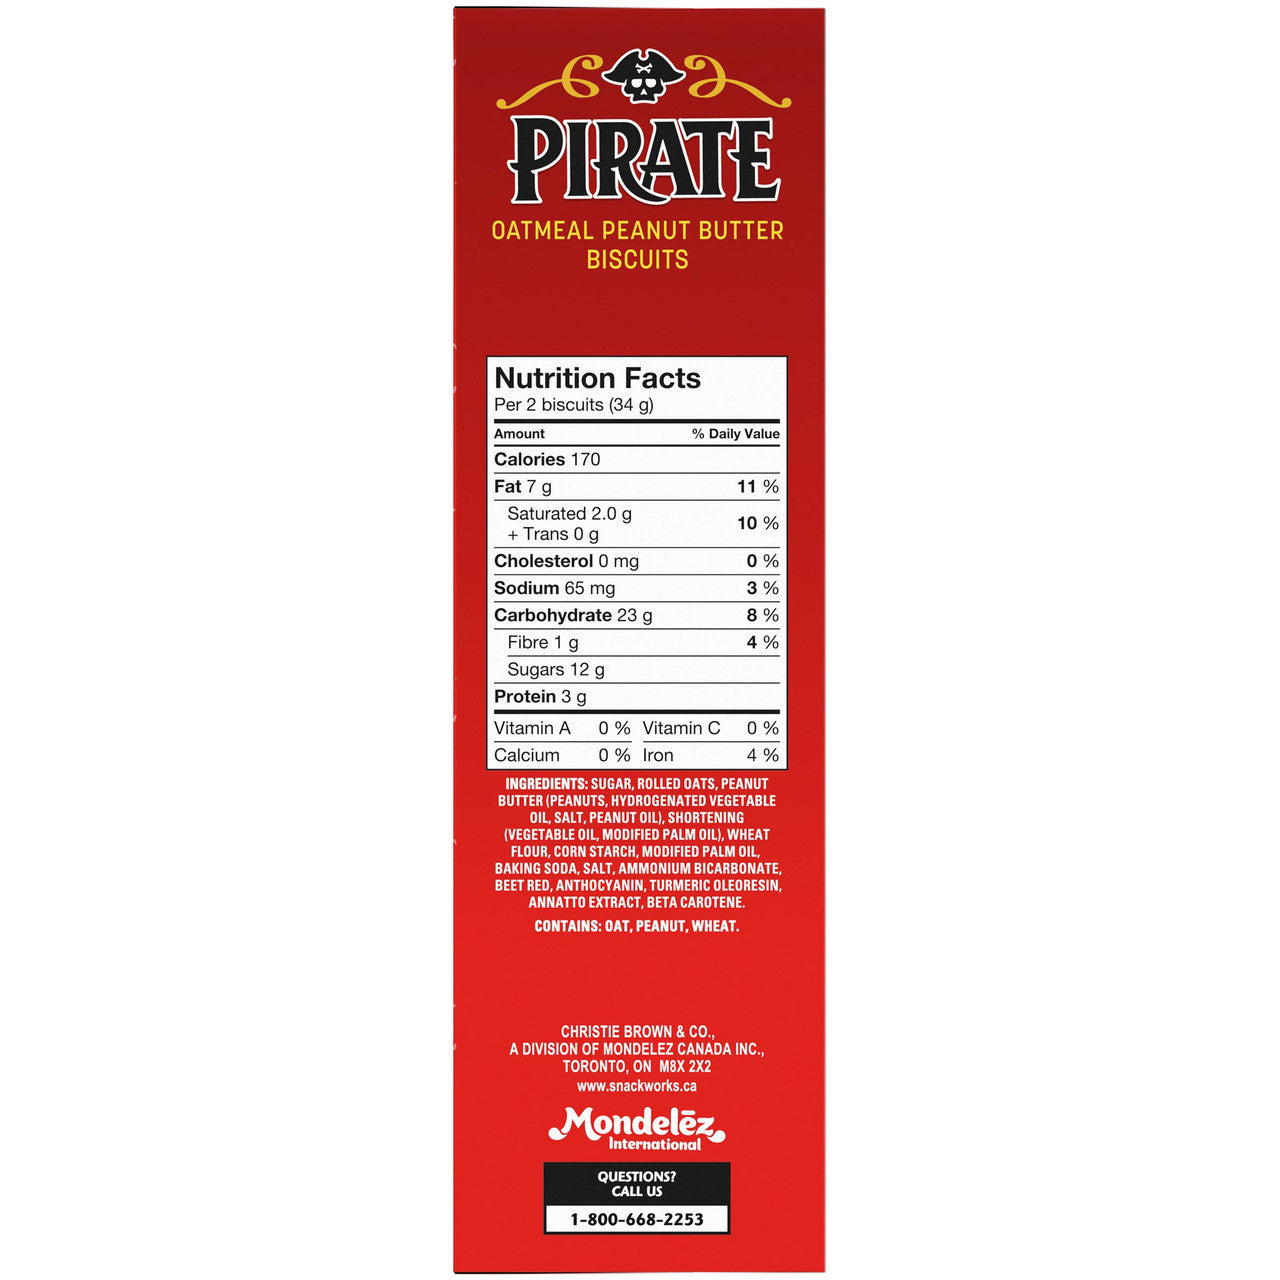 Christie Peek Freans Pirate Peanut Butter Oatmeal Cookies, 300g/10.6 oz., {Imported from Canada}